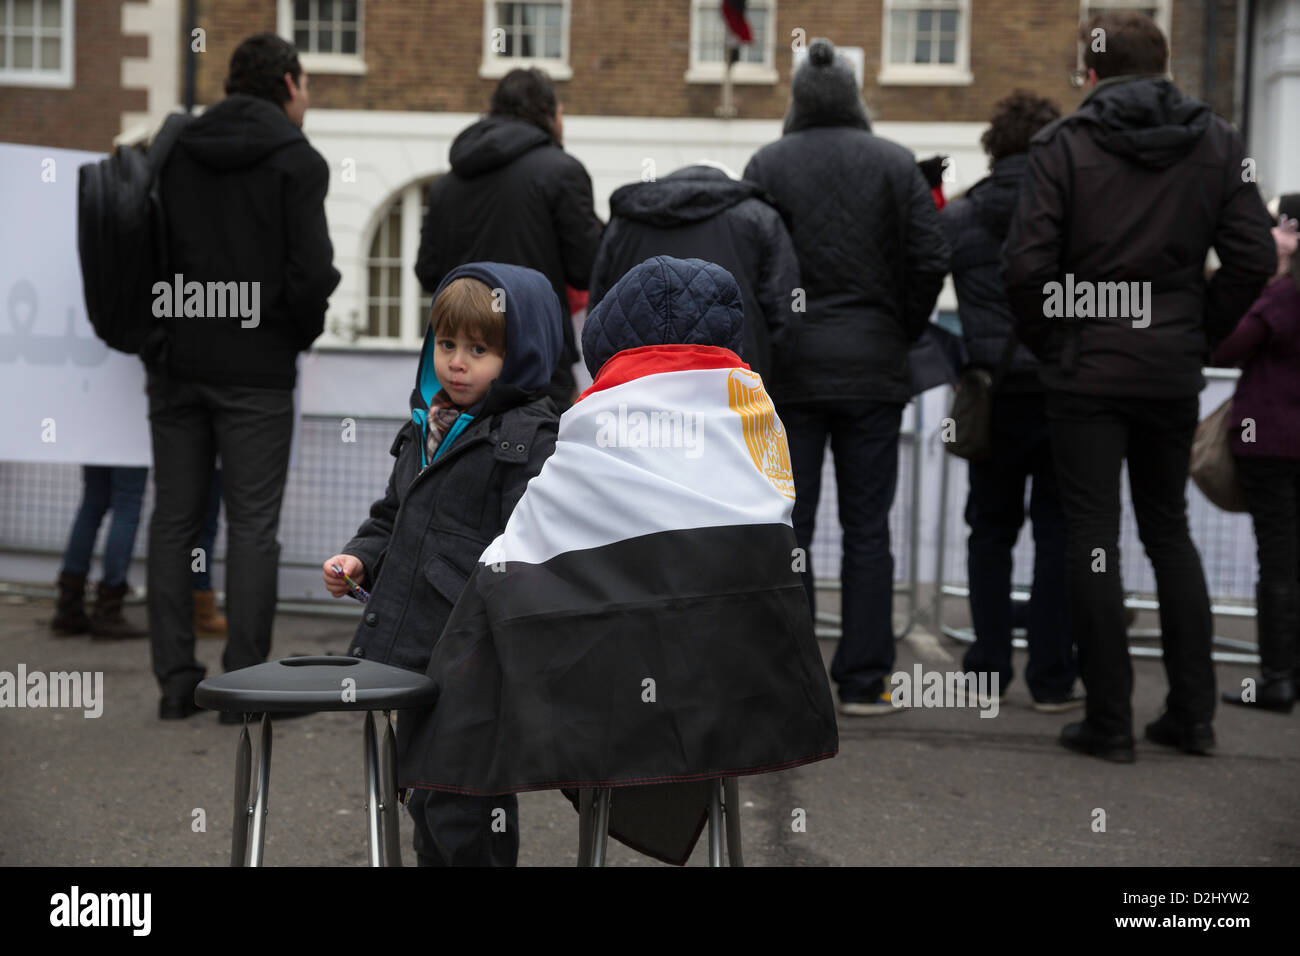 Protesters gathered outside the Egyptian Embassy in London for their 2nd revolution anniversary Stock Photo